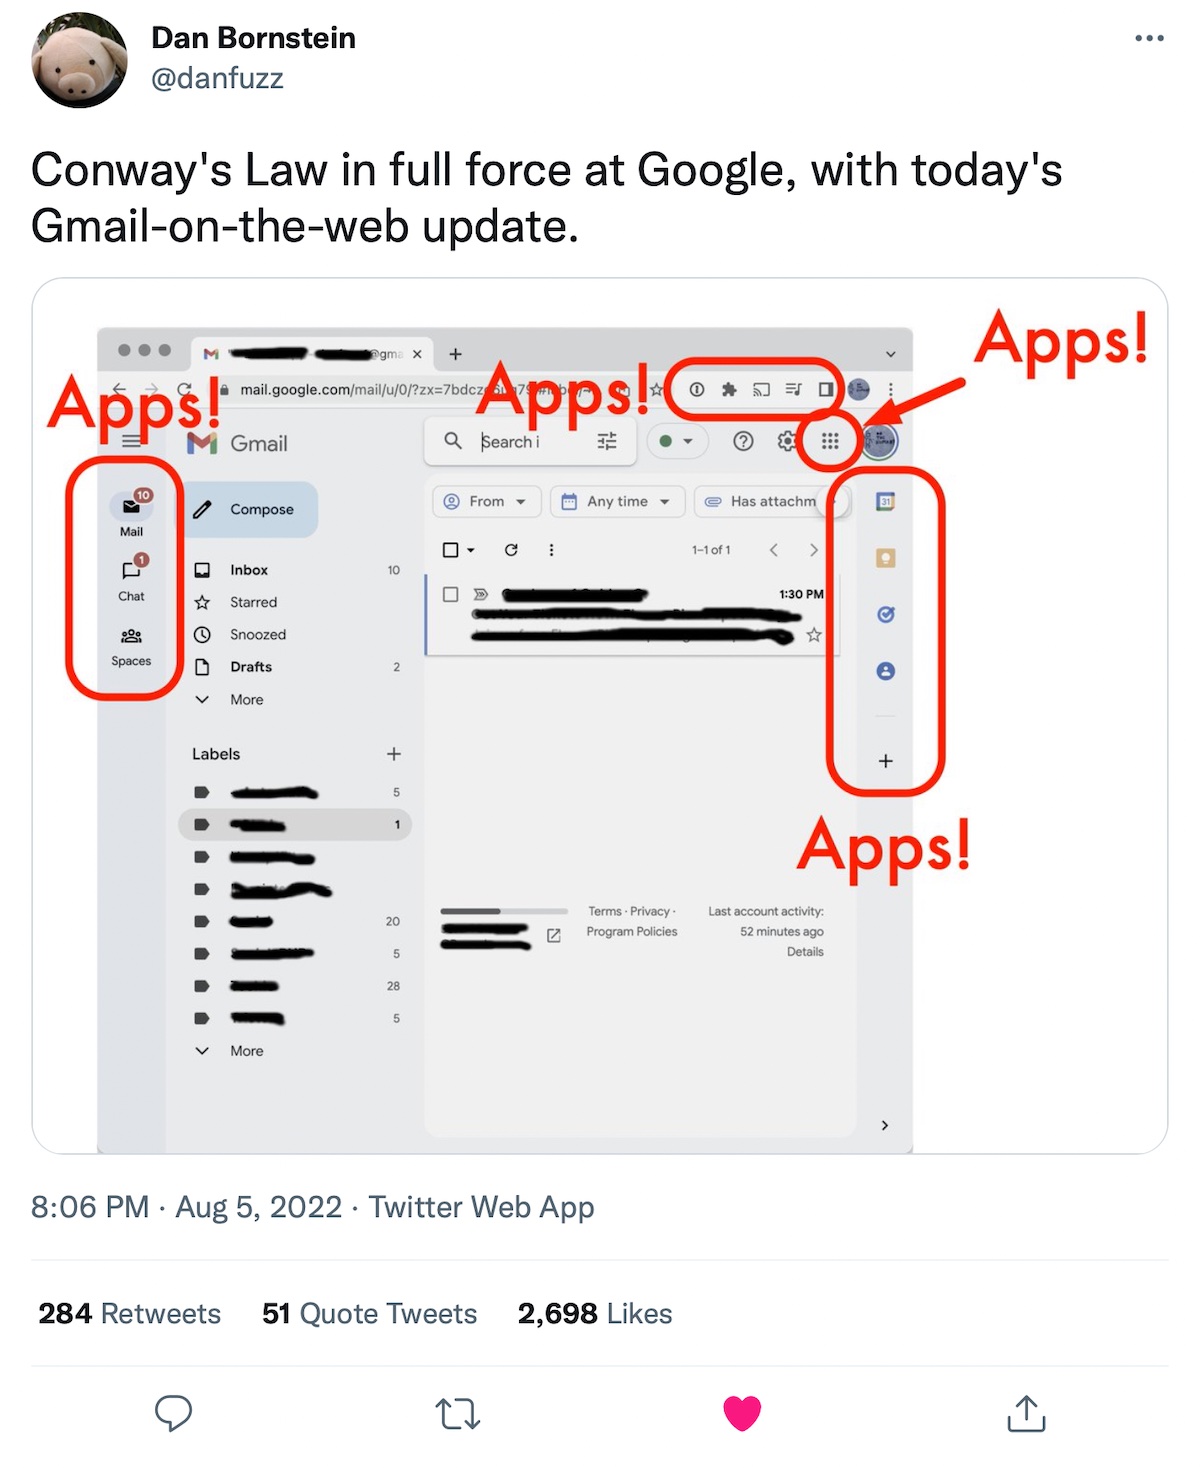 Tweet from @danfuzz that reads: 'Conway's Law inf full force at Google, with today's Gmail-on-the-web update.' There's a screenshot that shows the Gmail web interface with four separate areas of apps highlighted.